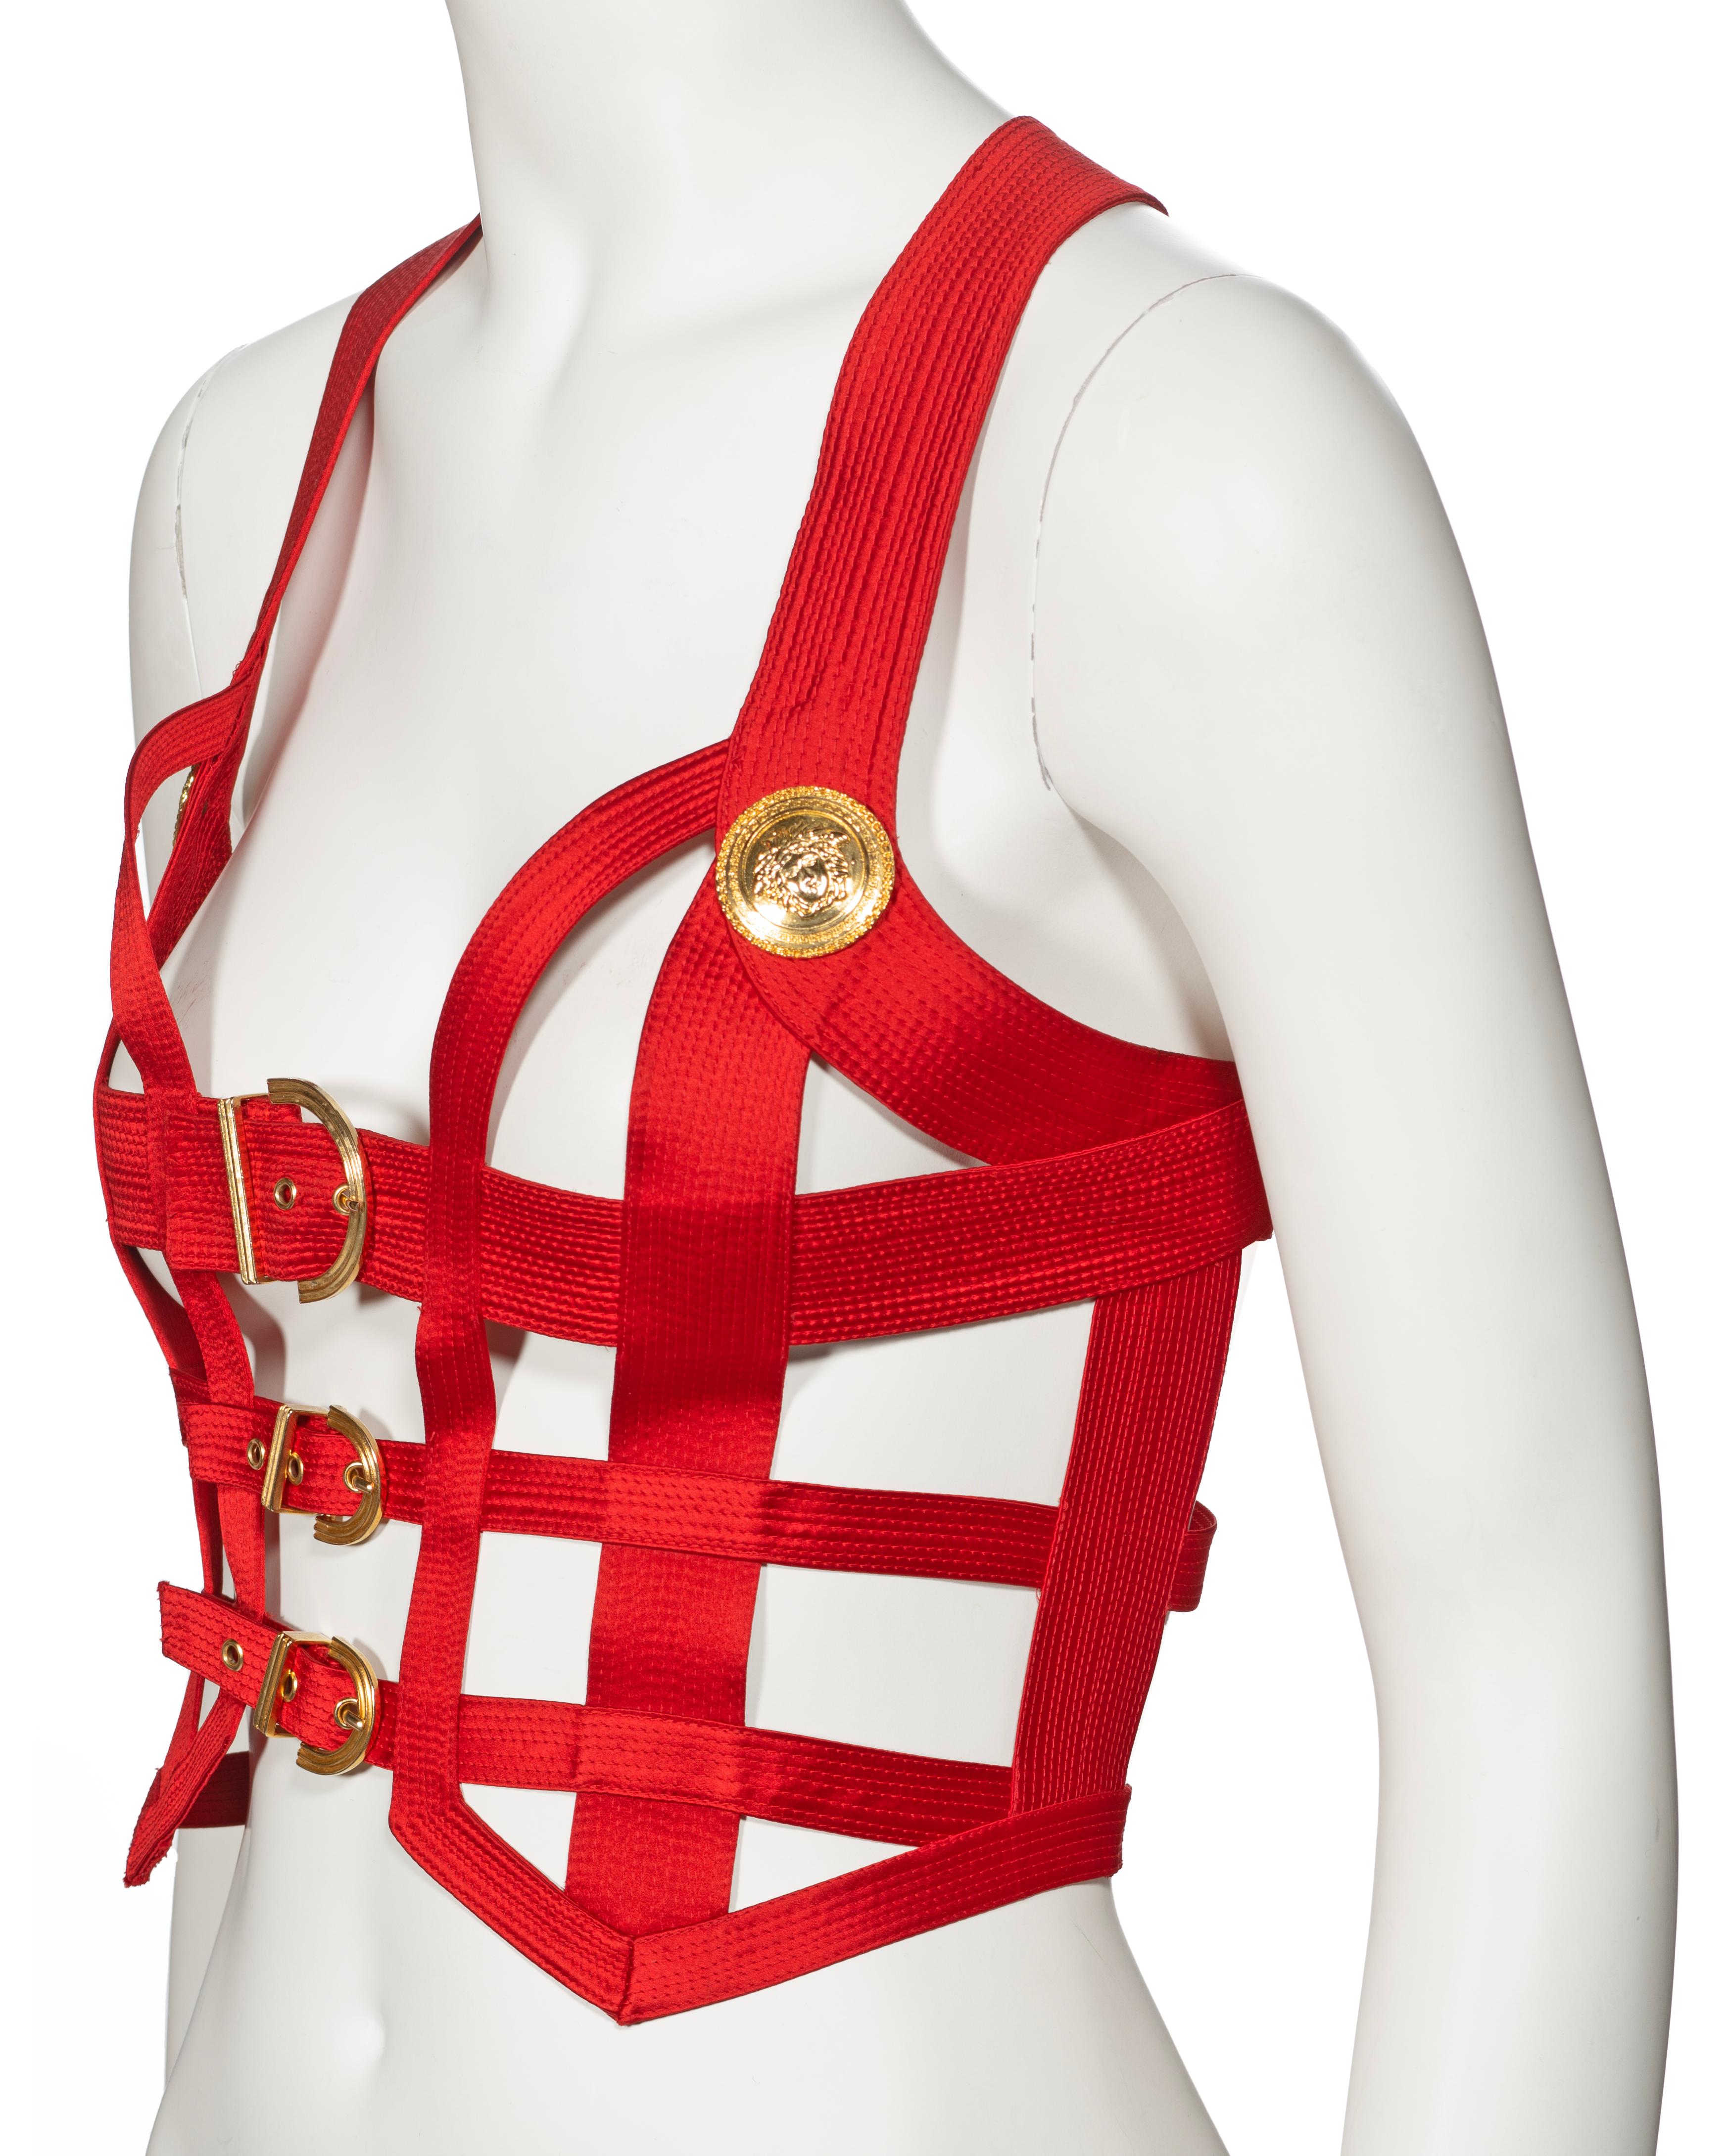 Gianni Versace Red Silk Bondage Corset Top, fw 1992 For Sale 11